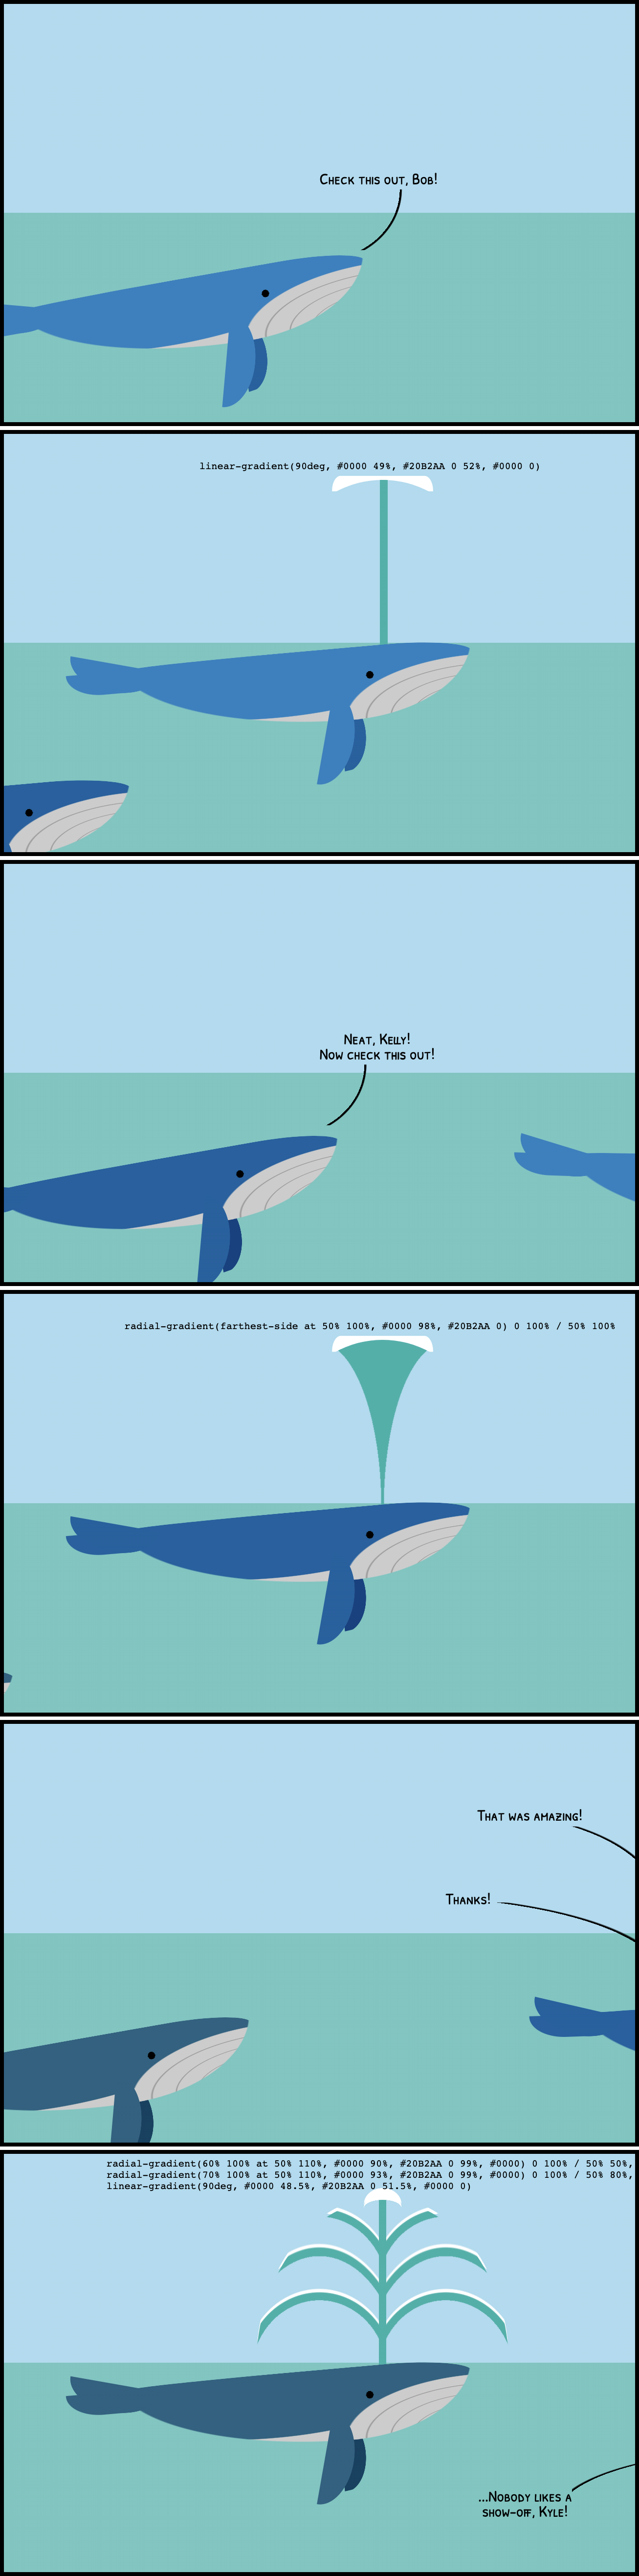 Cartoon with 6 panels: three whales showing off how they spray water by using different CSS gradients. The last one makes a really complex one and the other whales call him out on it.